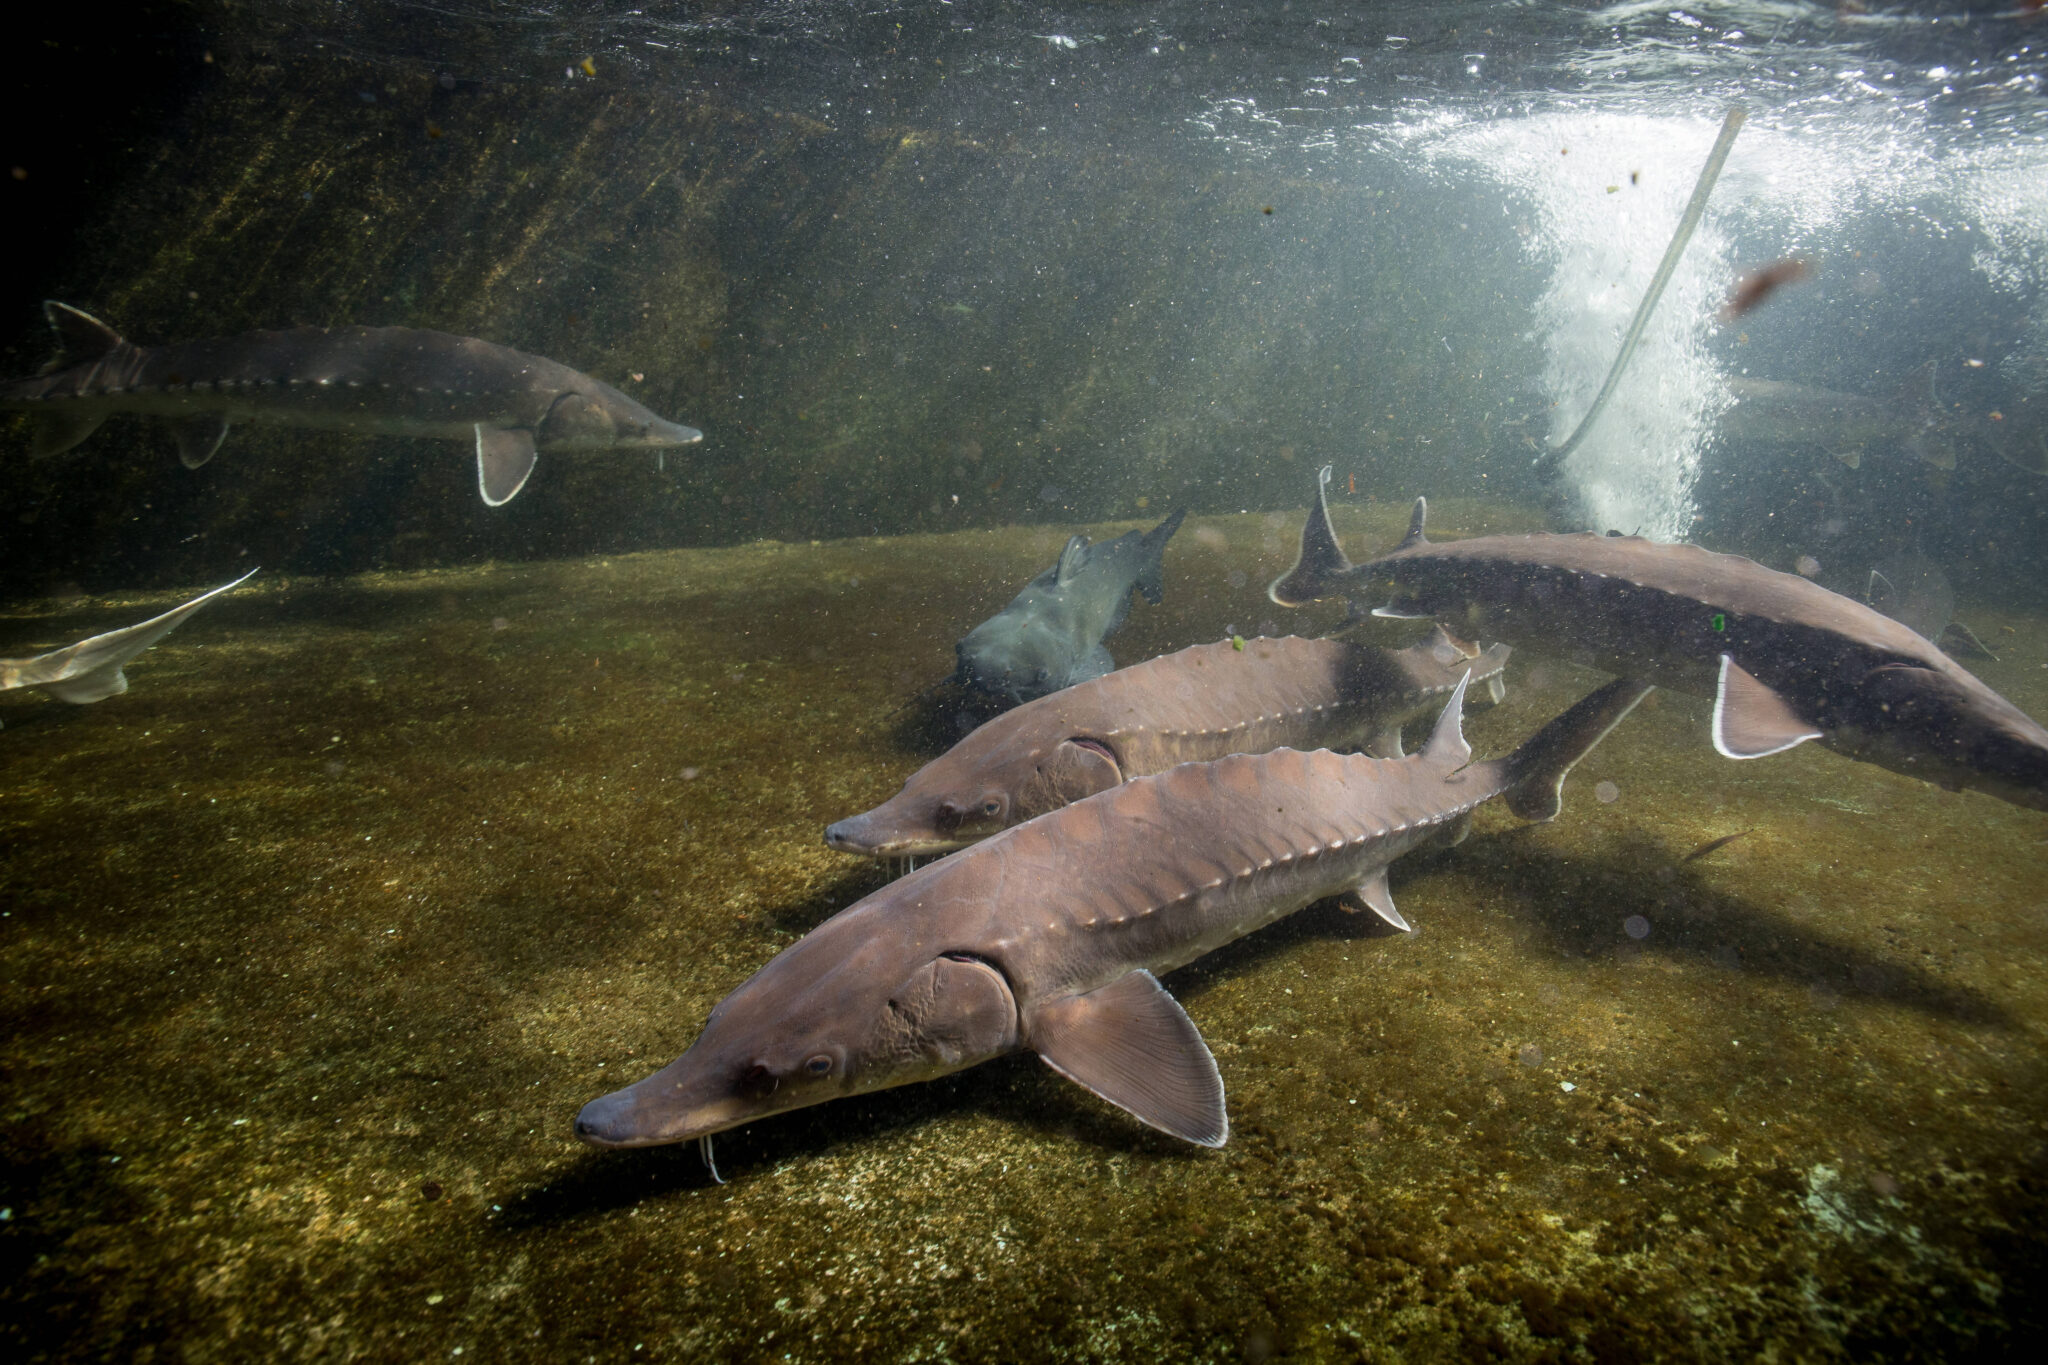 Virginia Sturgeon Swam More Than 500 Miles to Spawn, Research Shows